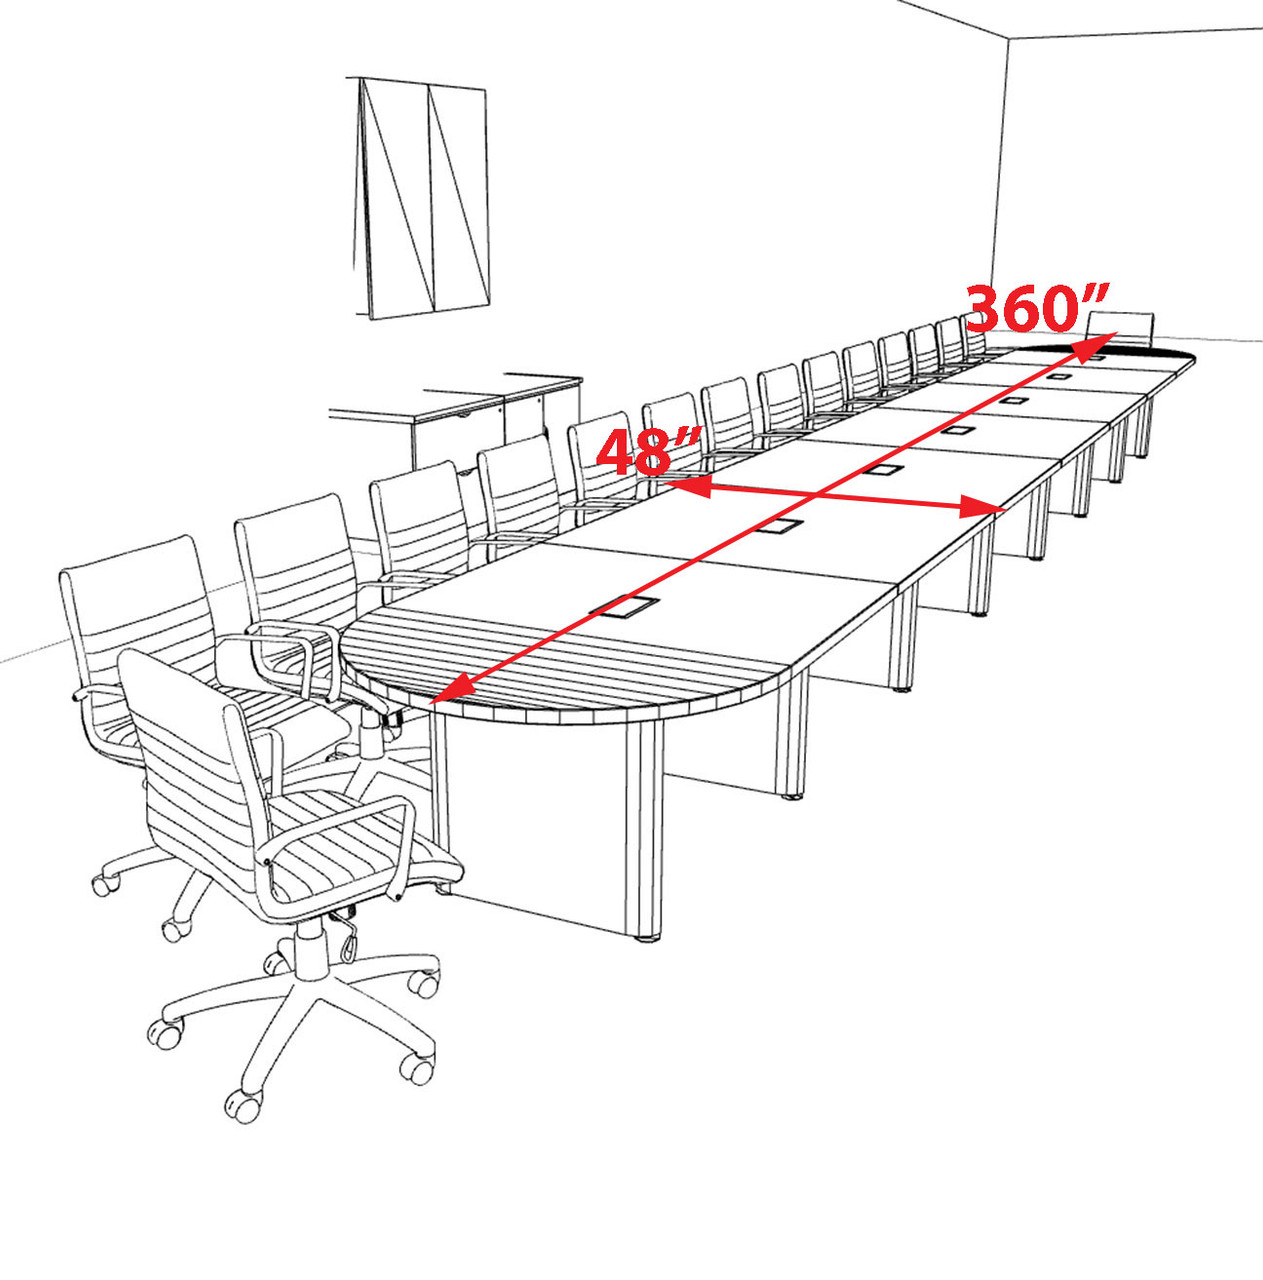 Racetrack Cable Management 30' Feet Conference Table, #OF-CON-CRP87